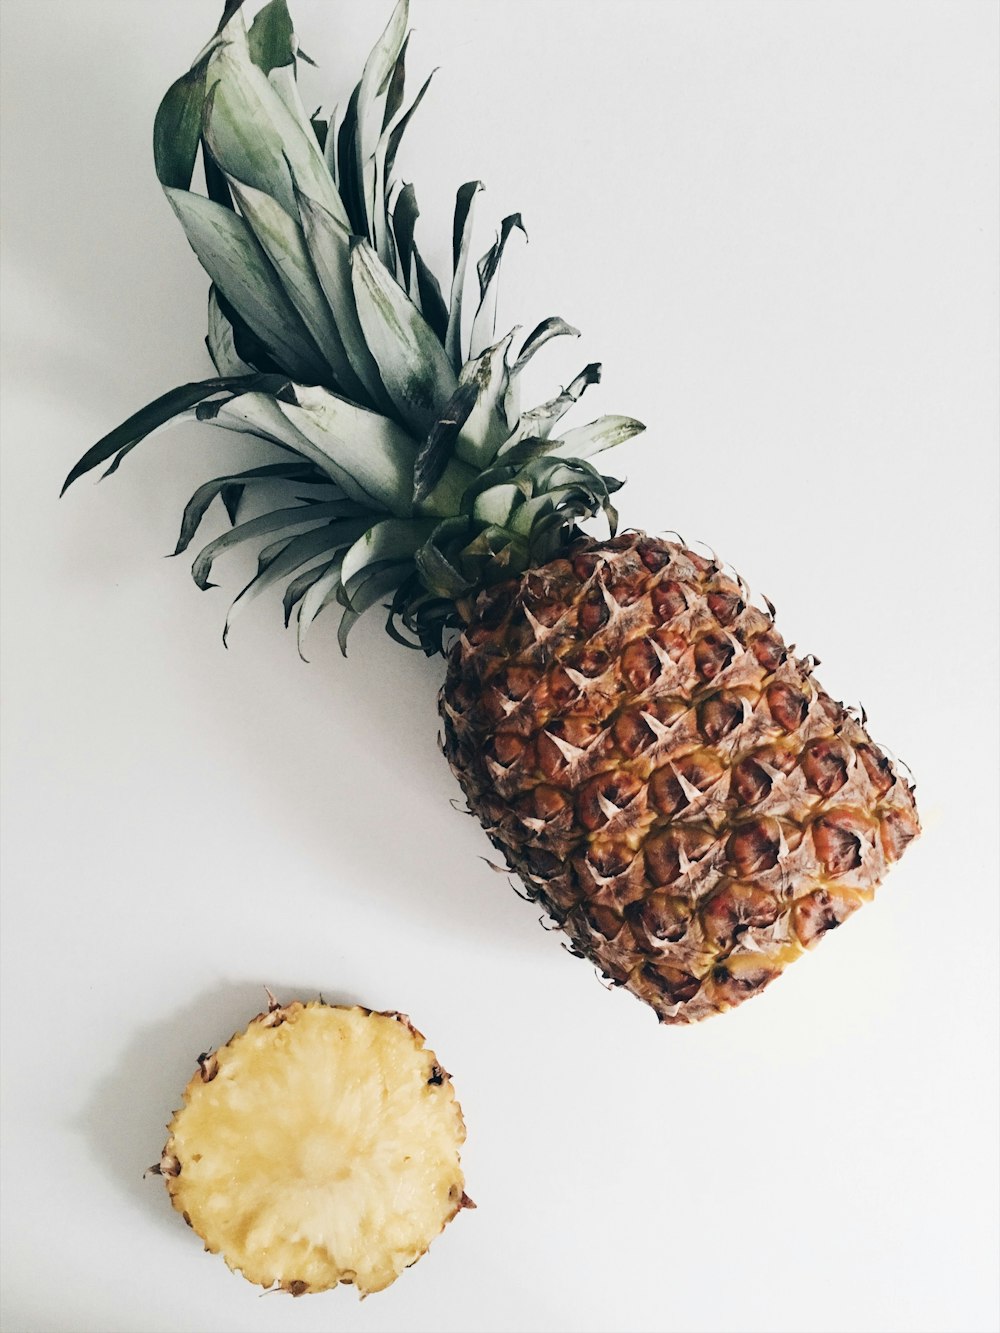 A pineapple lying on its side with its bottom sliced off.